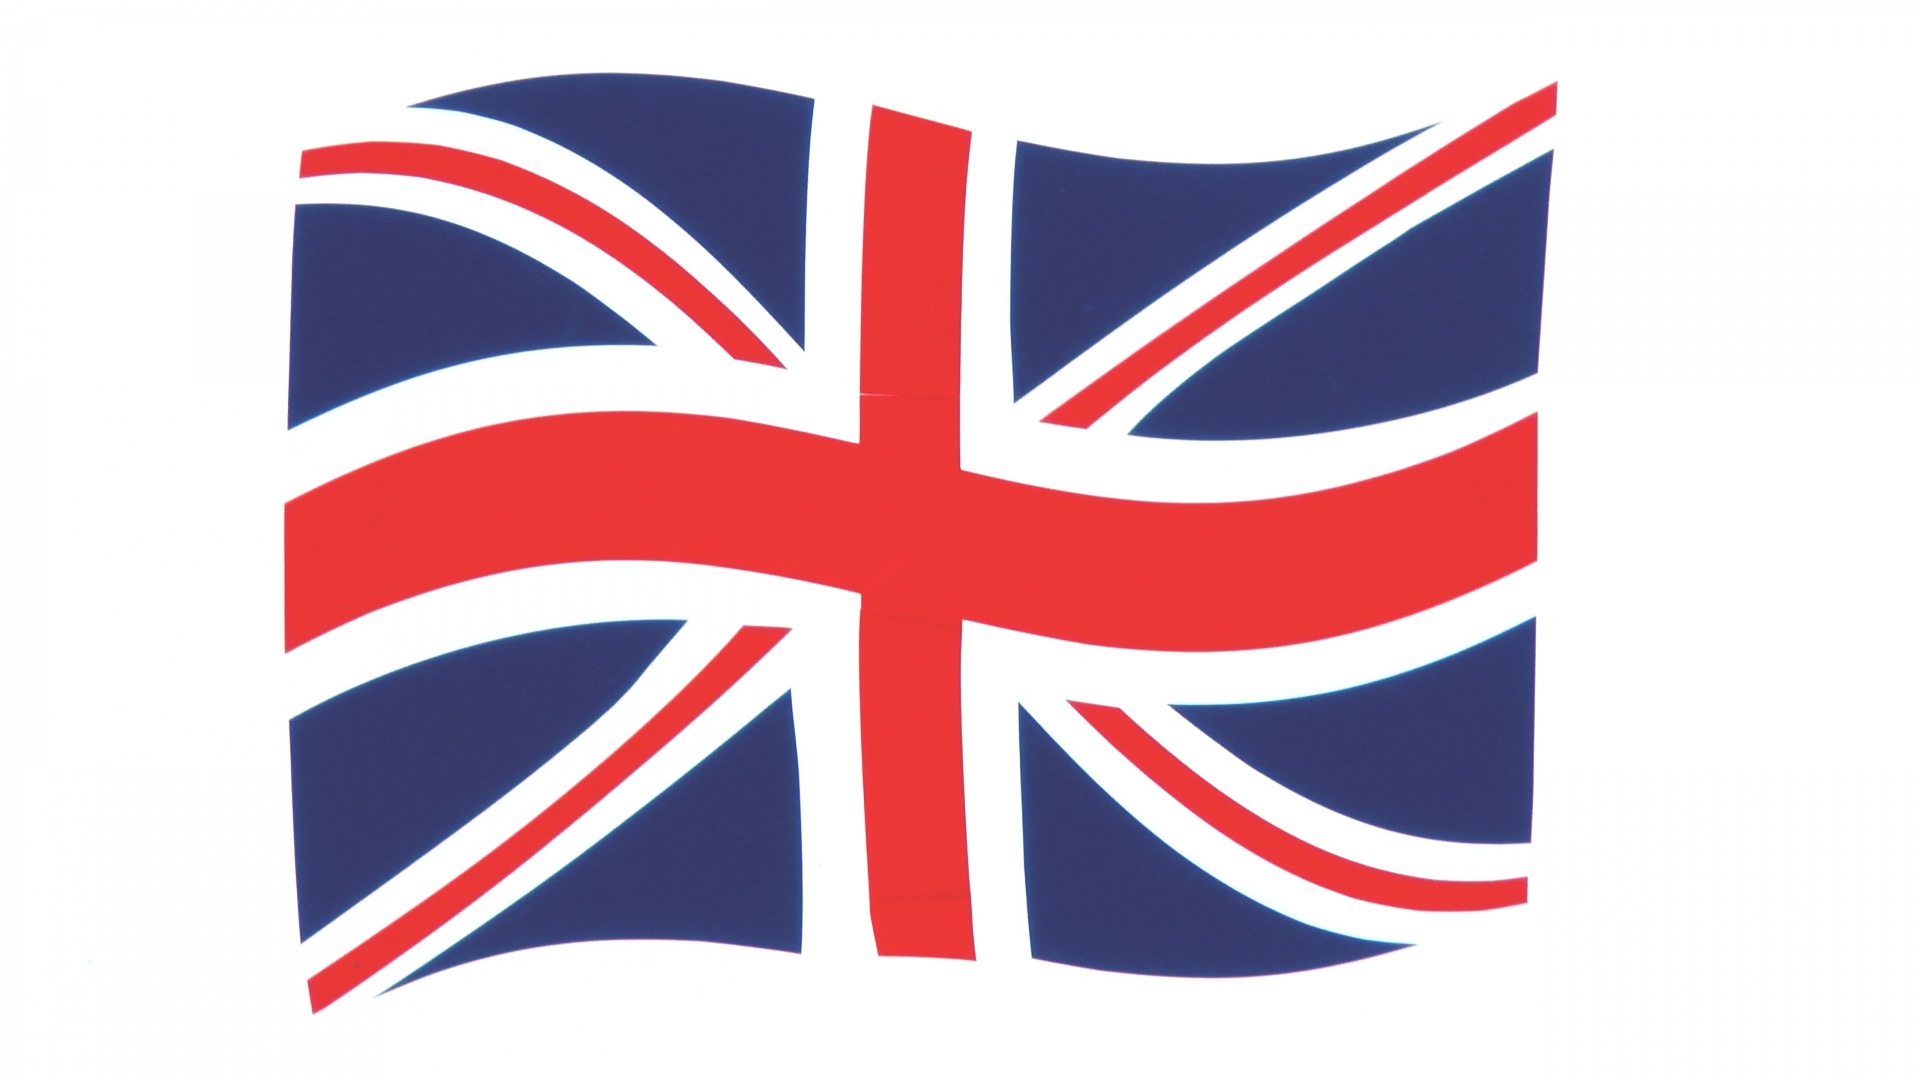 What Are The 3 Flags Of The Union Jack - Printable Templates